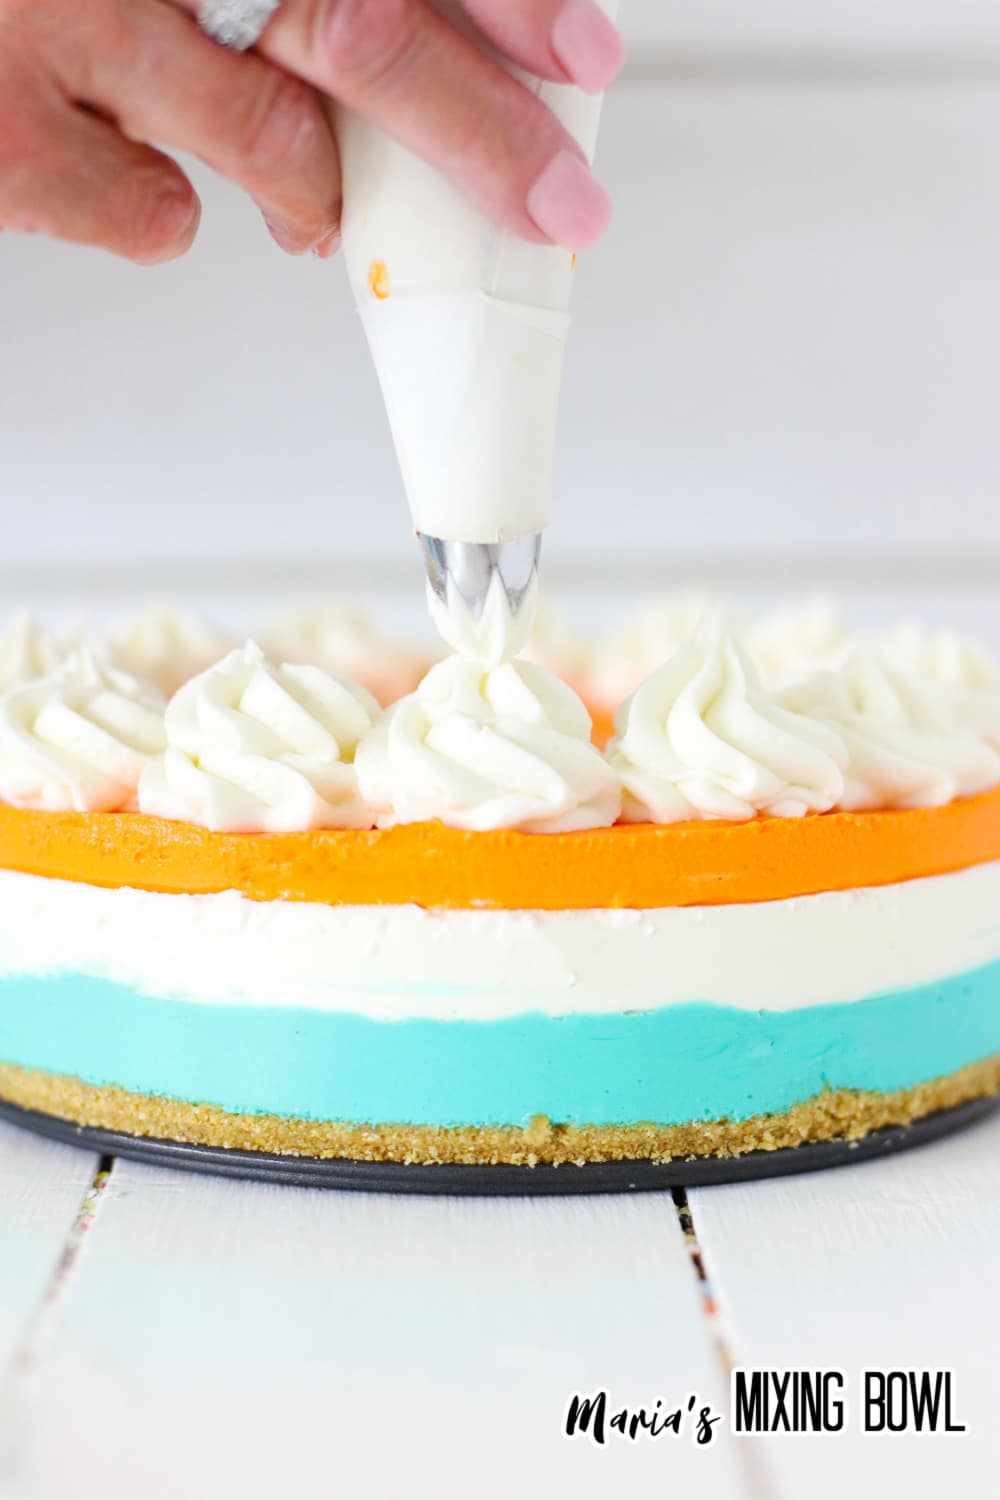 whipped cream being piped on top of the orange and blue cake